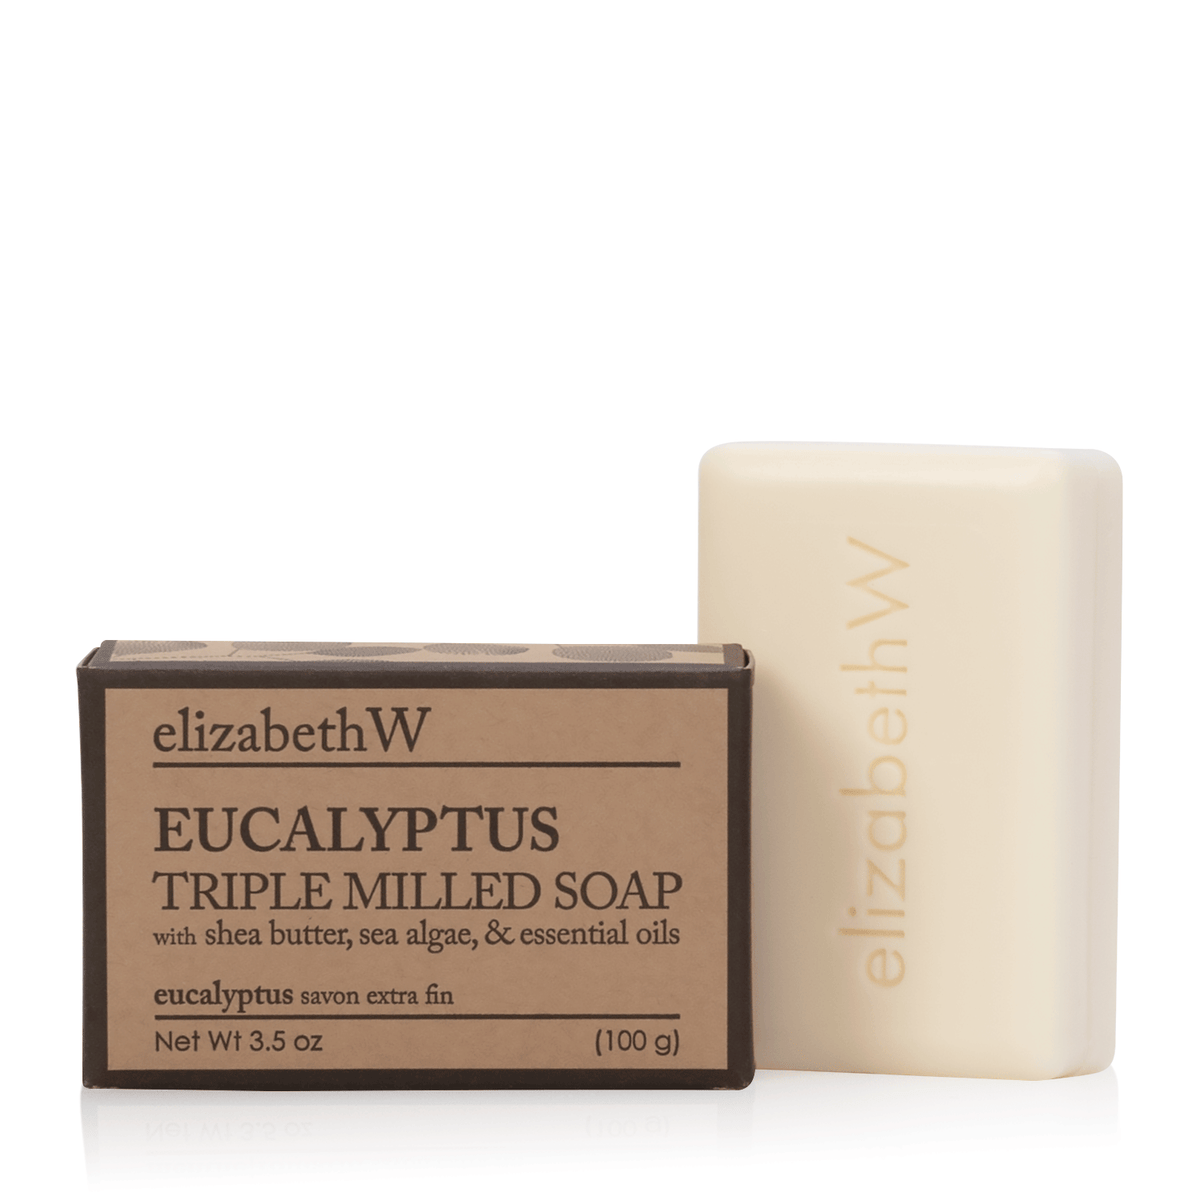 A bar of elizabeth W Purely Essential Eucalyptus Triple-Milled Soap next to its packaging. The box is labeled "elizabeth W eucalyptus soap triple-milled, sea algae, & essential oils," indicating